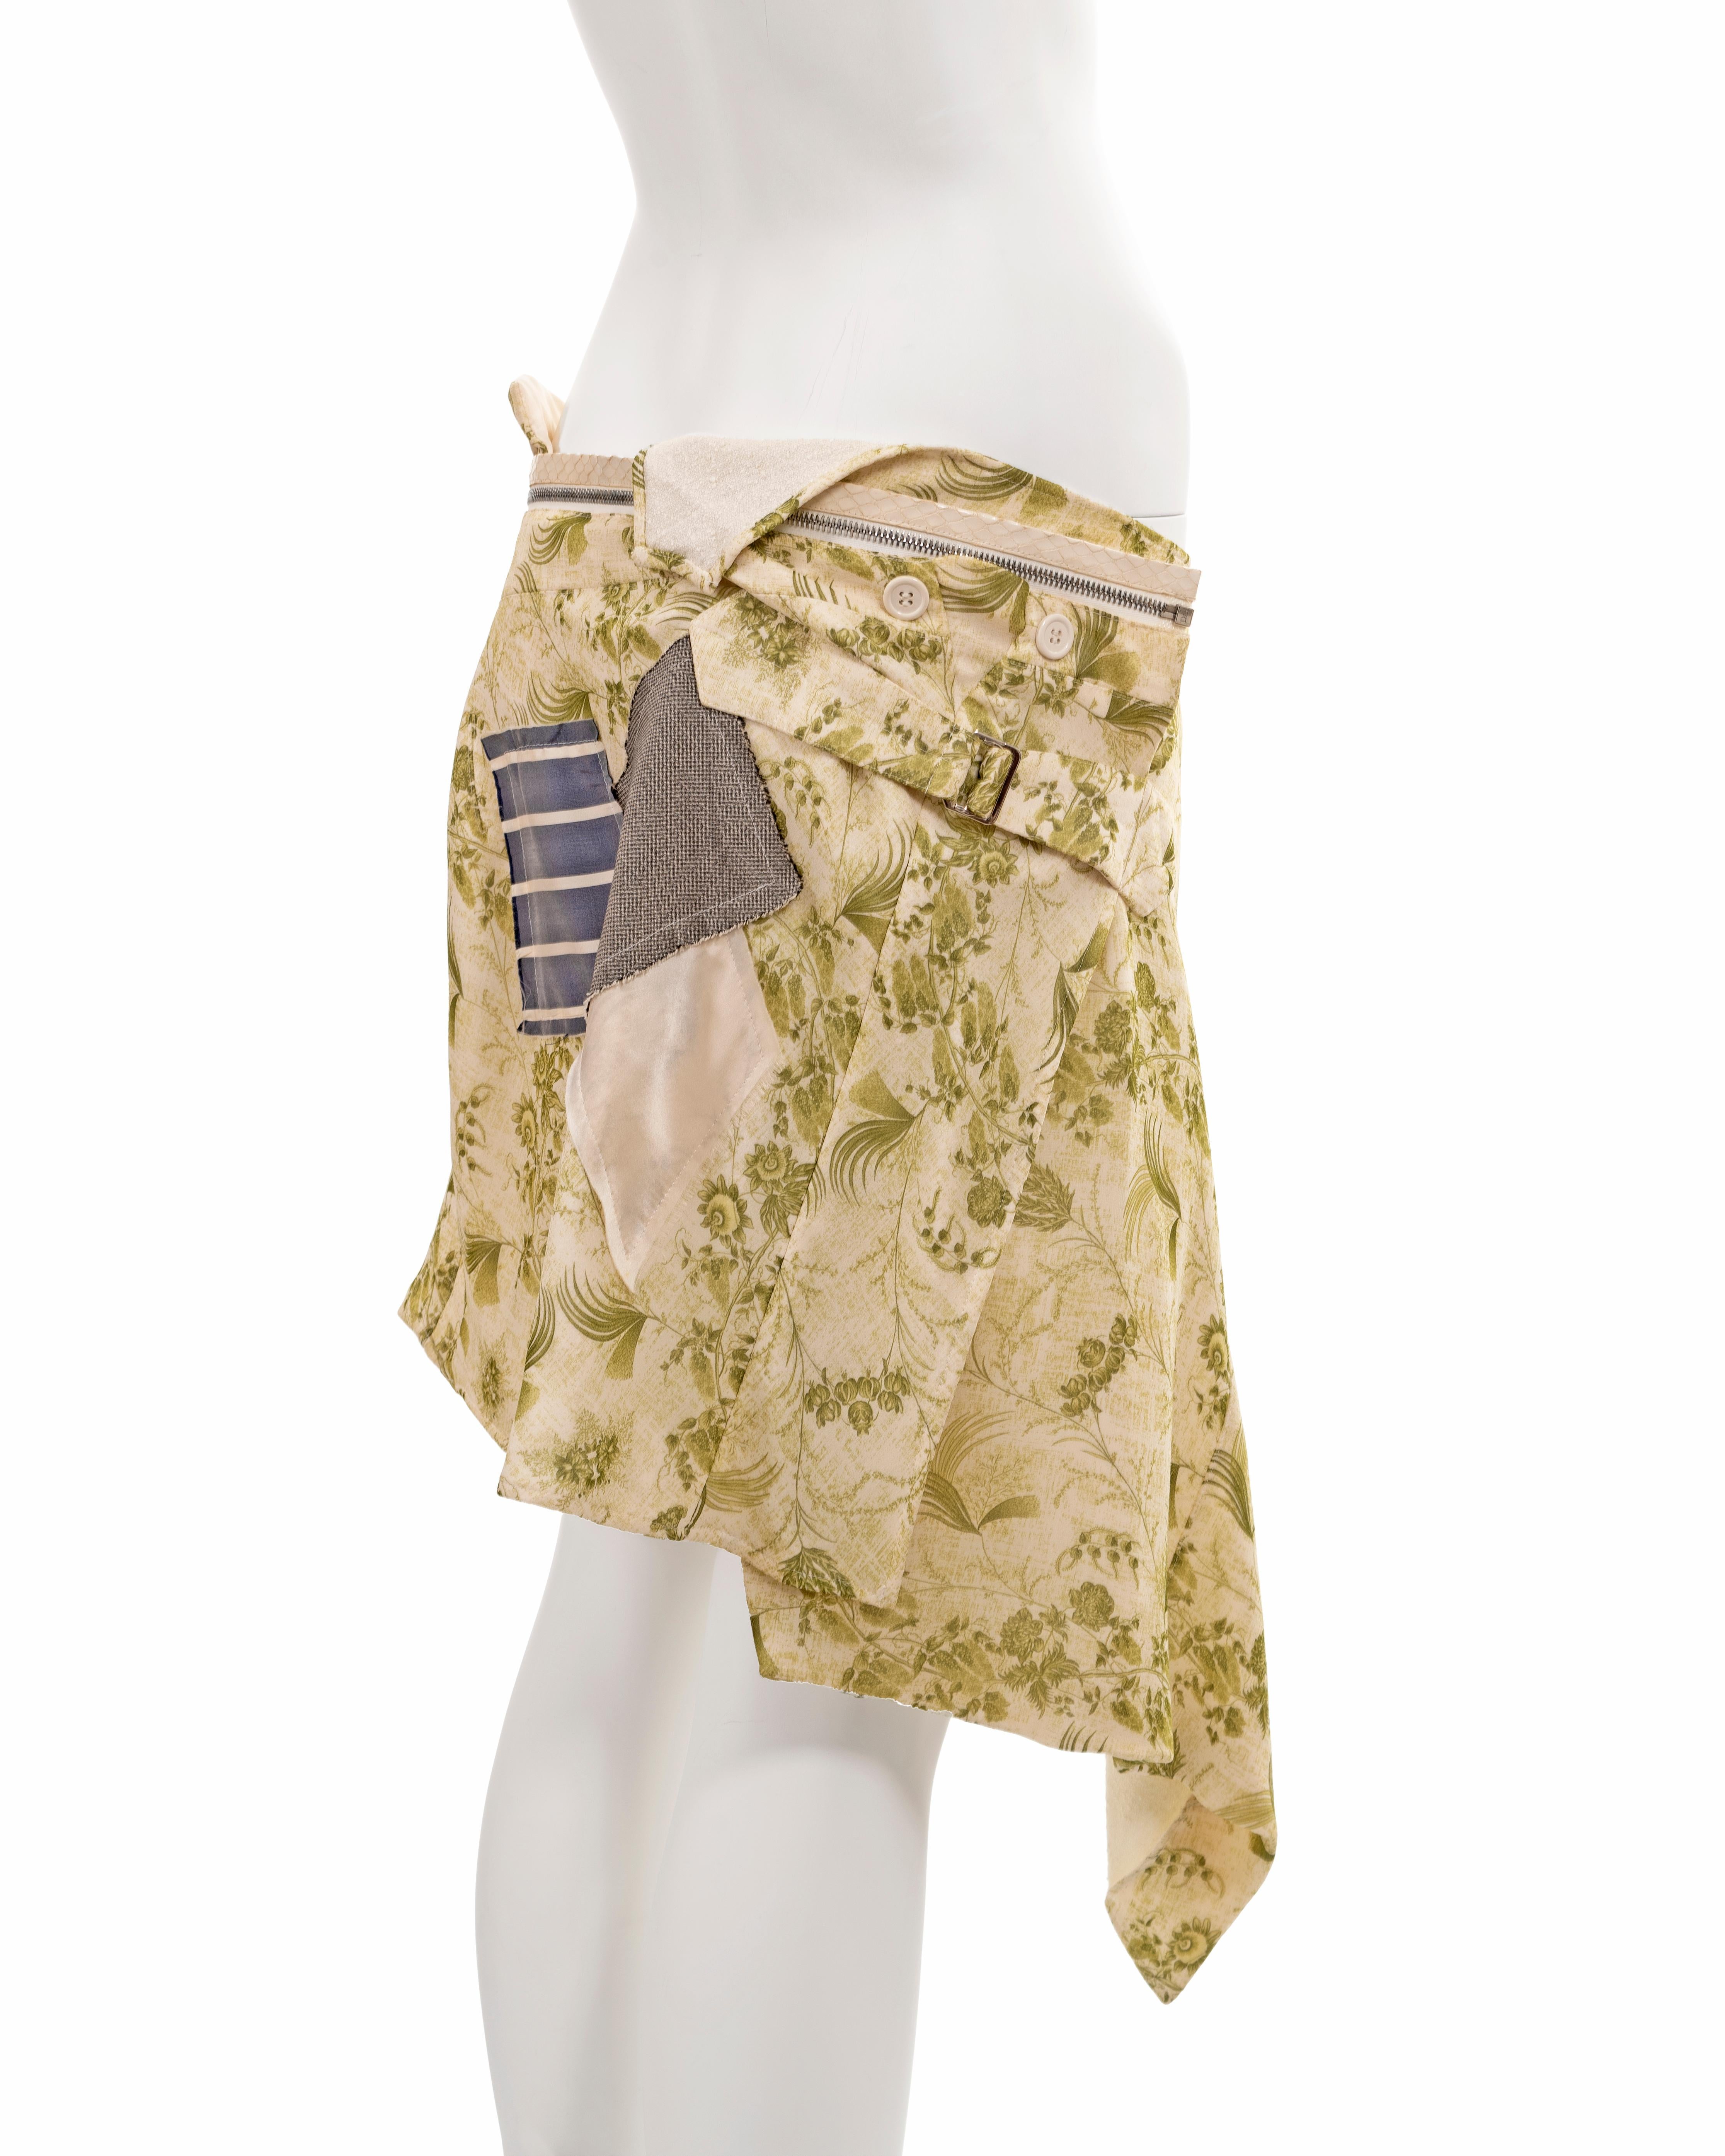 Christian Dior by John Galliano deconstructed floral silk wrap skirt, ss 2001 For Sale 6